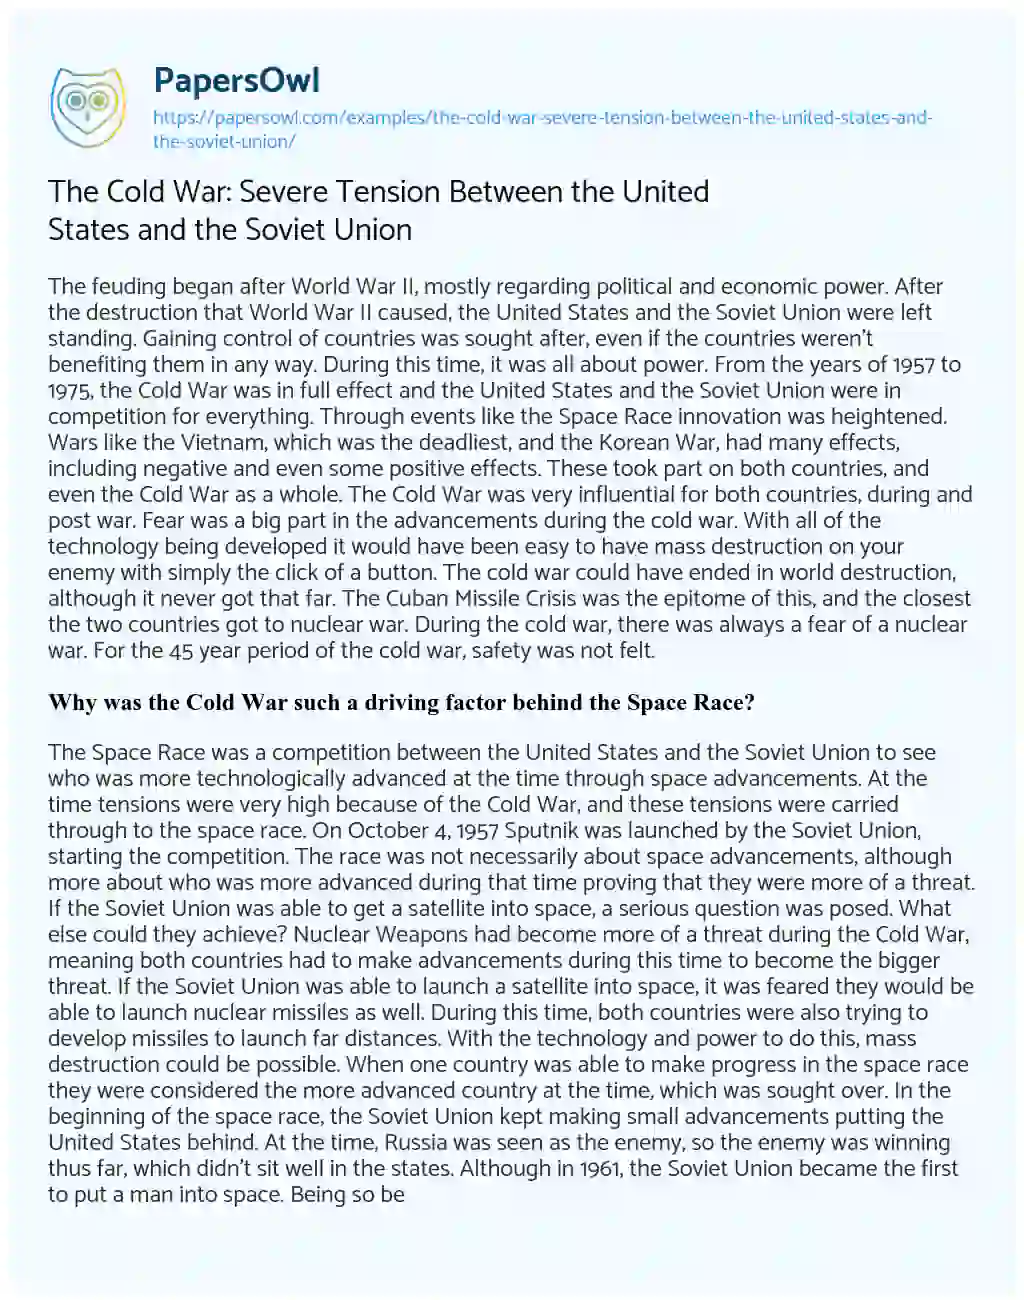 The Cold War: Severe Tension between the United States and the Soviet Union essay